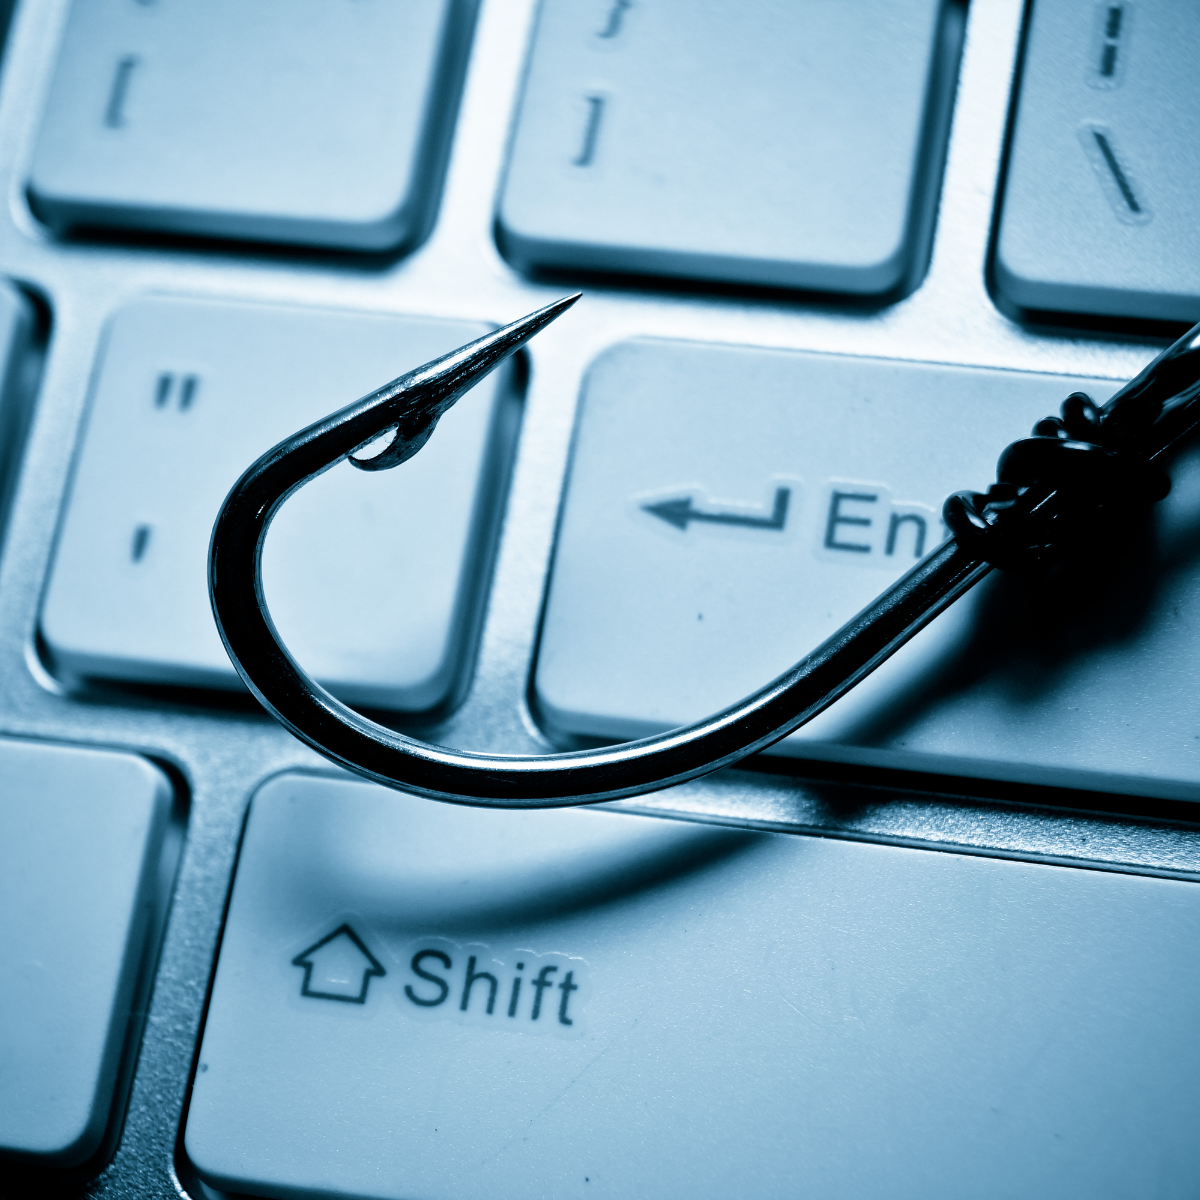 How to Identify and Prevent Phishing in Businesses